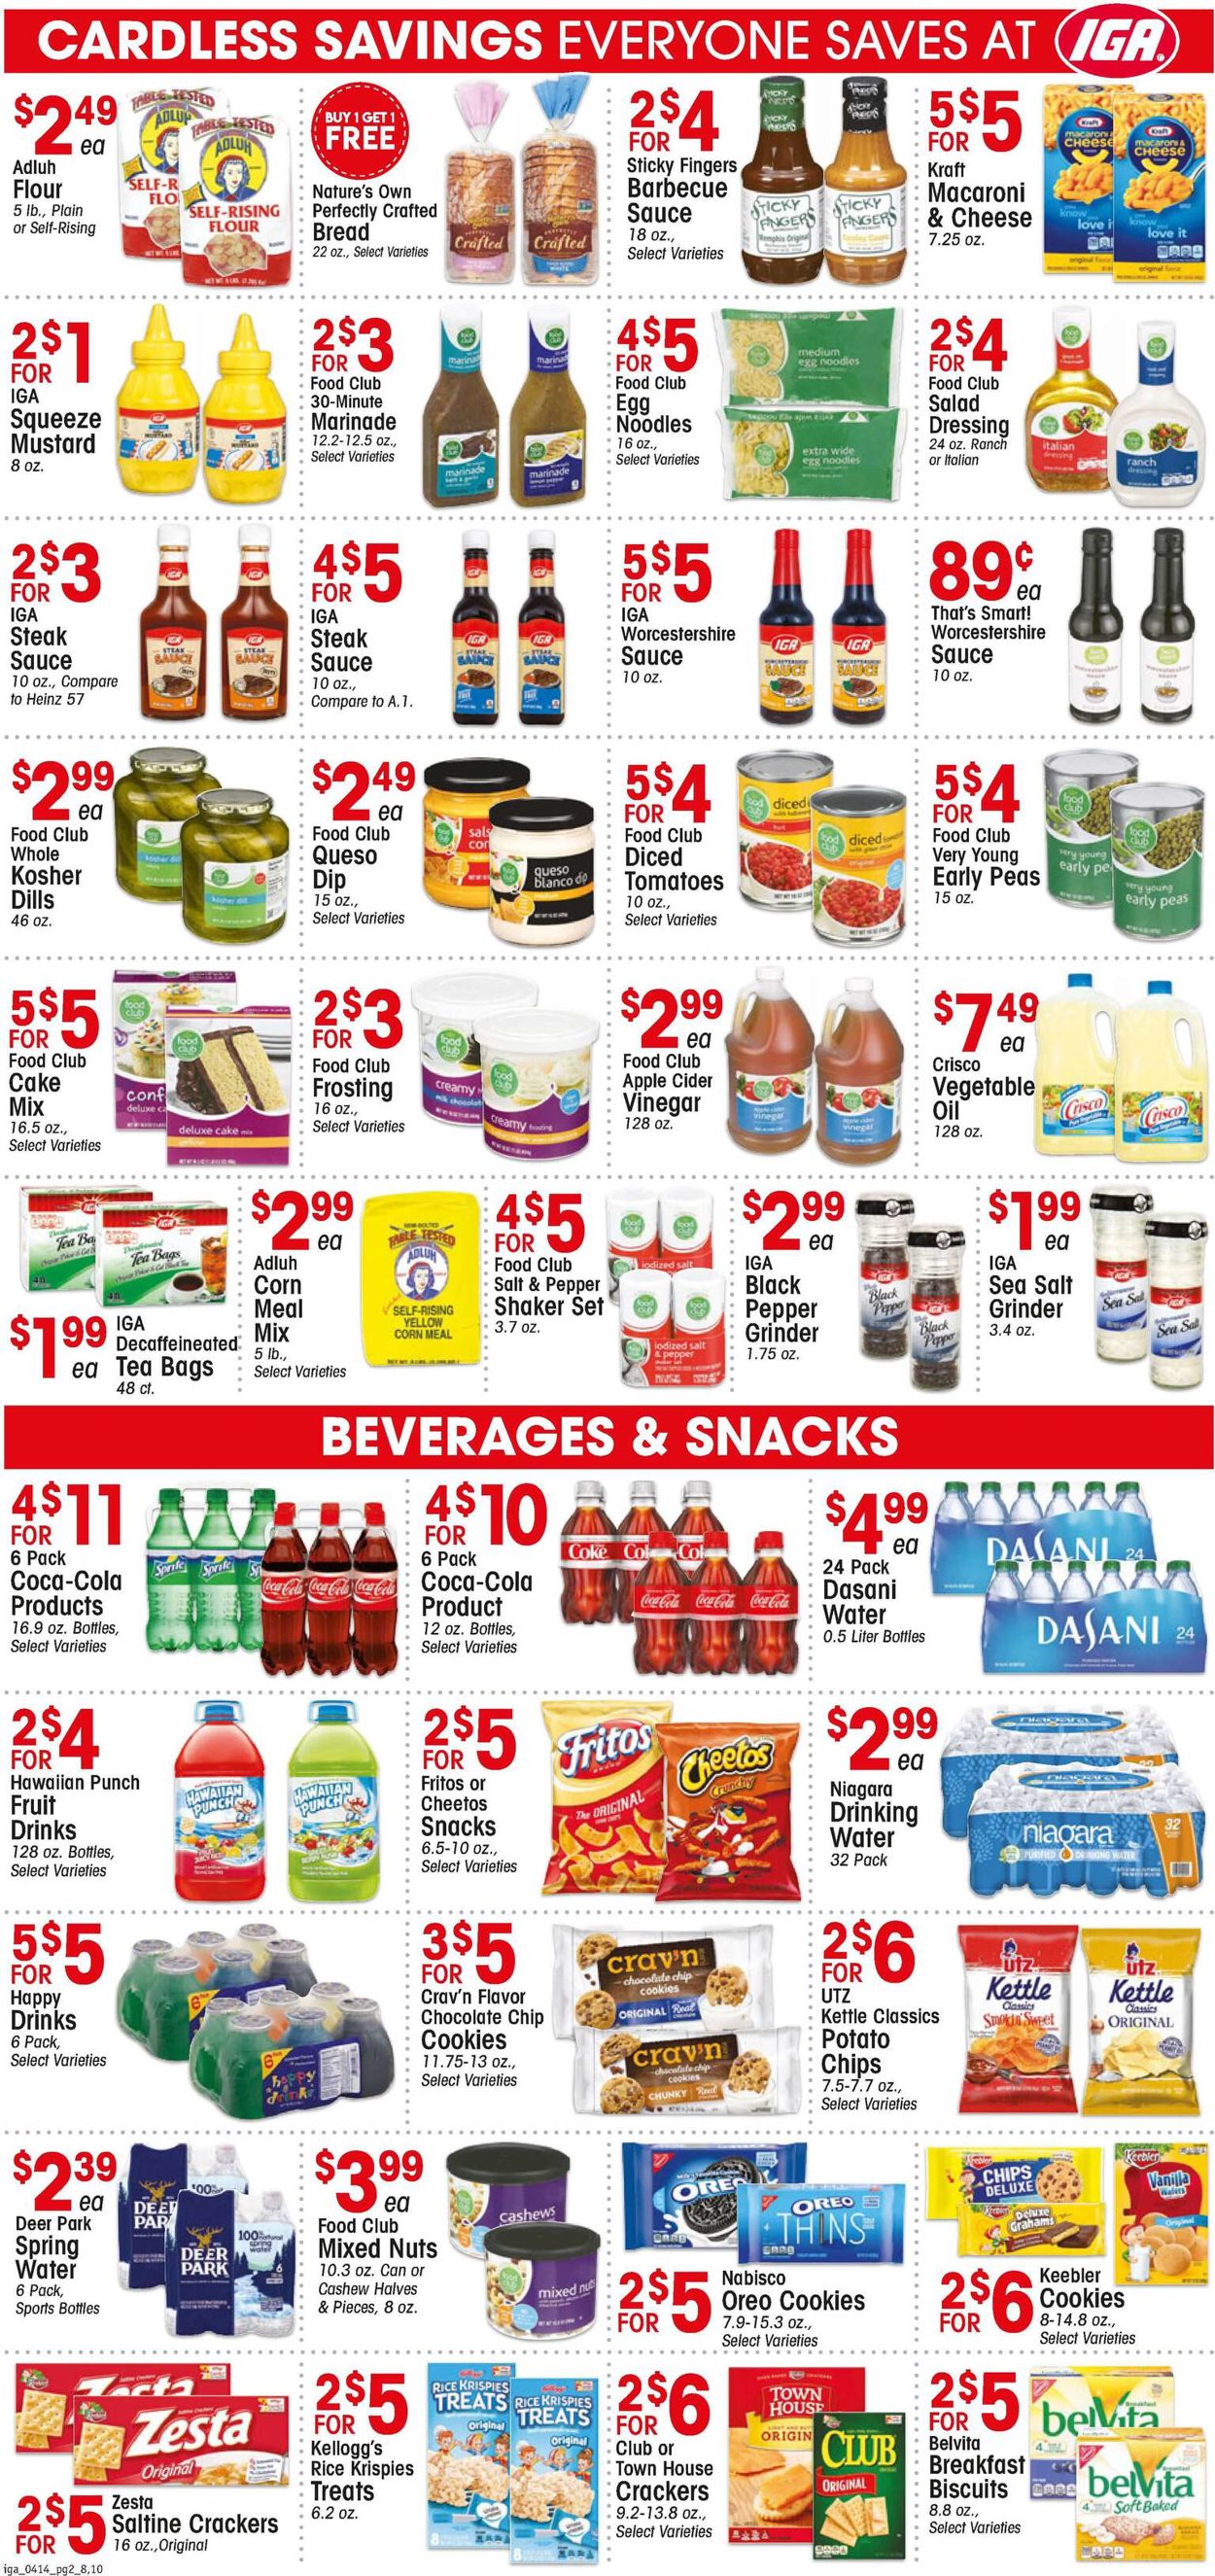 IGA Current weekly ad 04/14 - 04/20/2021 [2] - frequent-ads.com